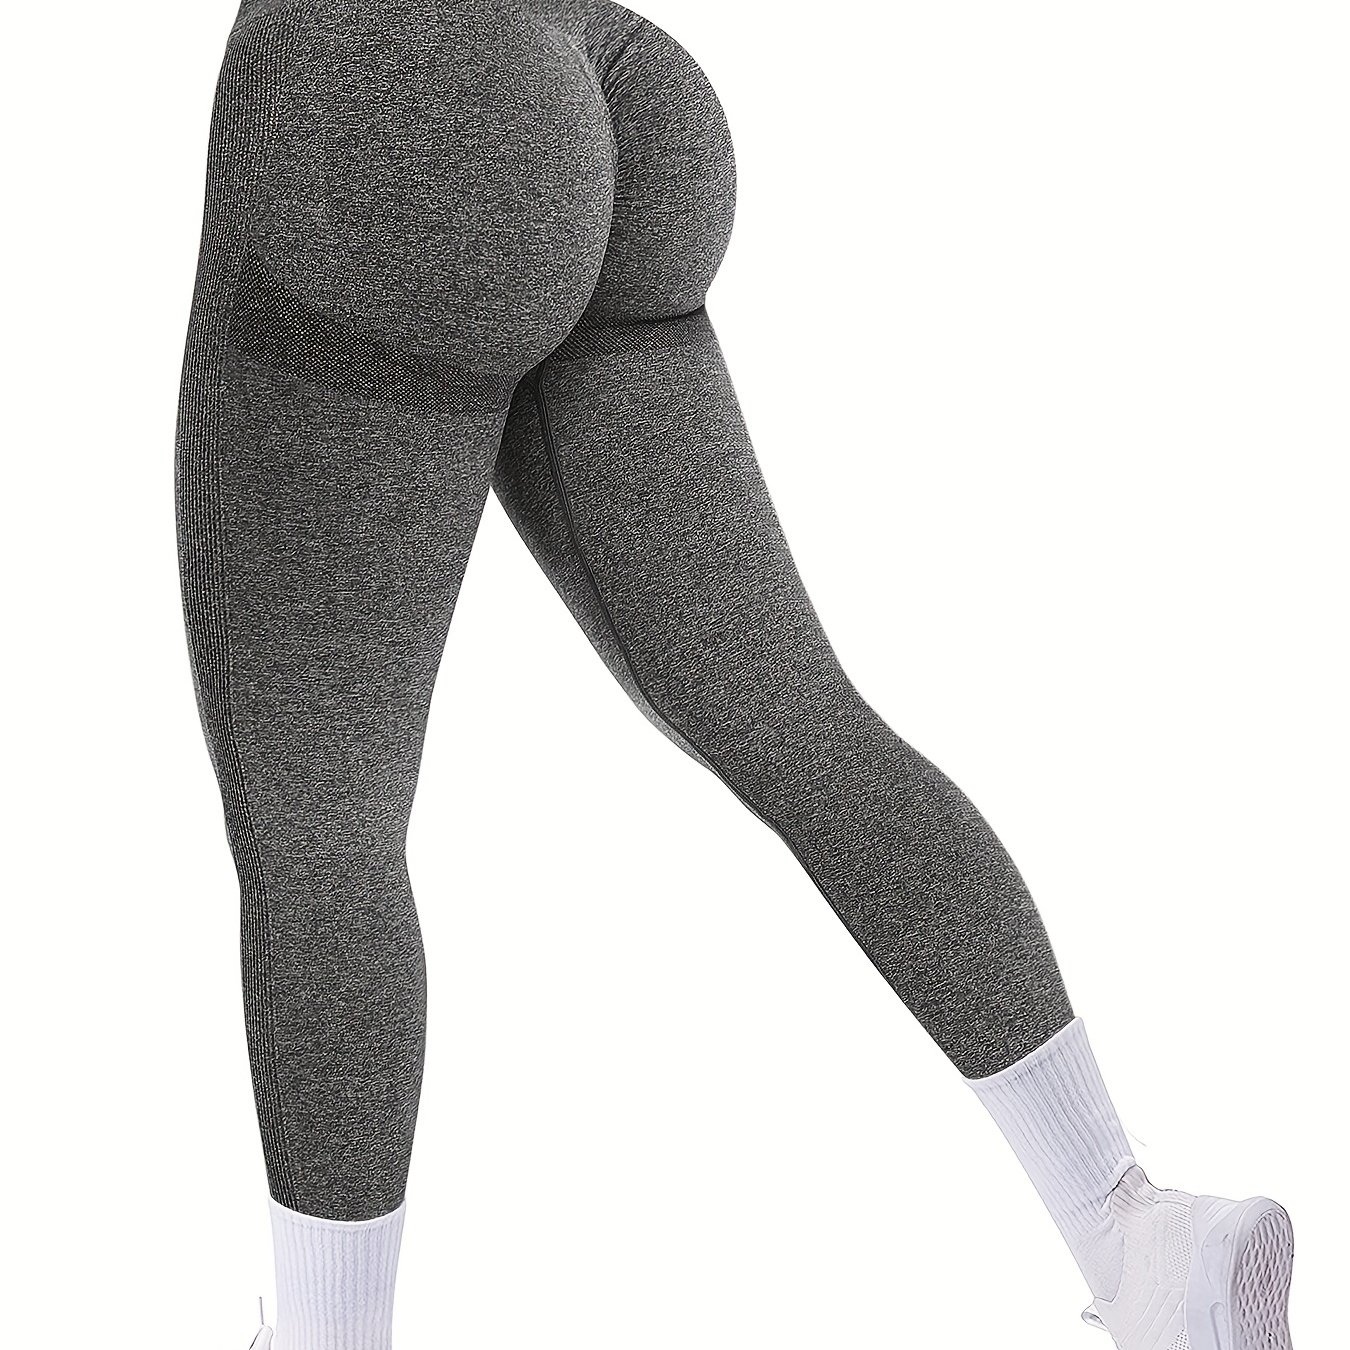 Designer Align Yoga Leggings High Waist, Seamless, Scrunch, Naked Feeling  Womens Sports Direct Yoga Pants For Breathable Workout And Gym Hot Selling  2023 Collection From Luxurymerchant, $19.51